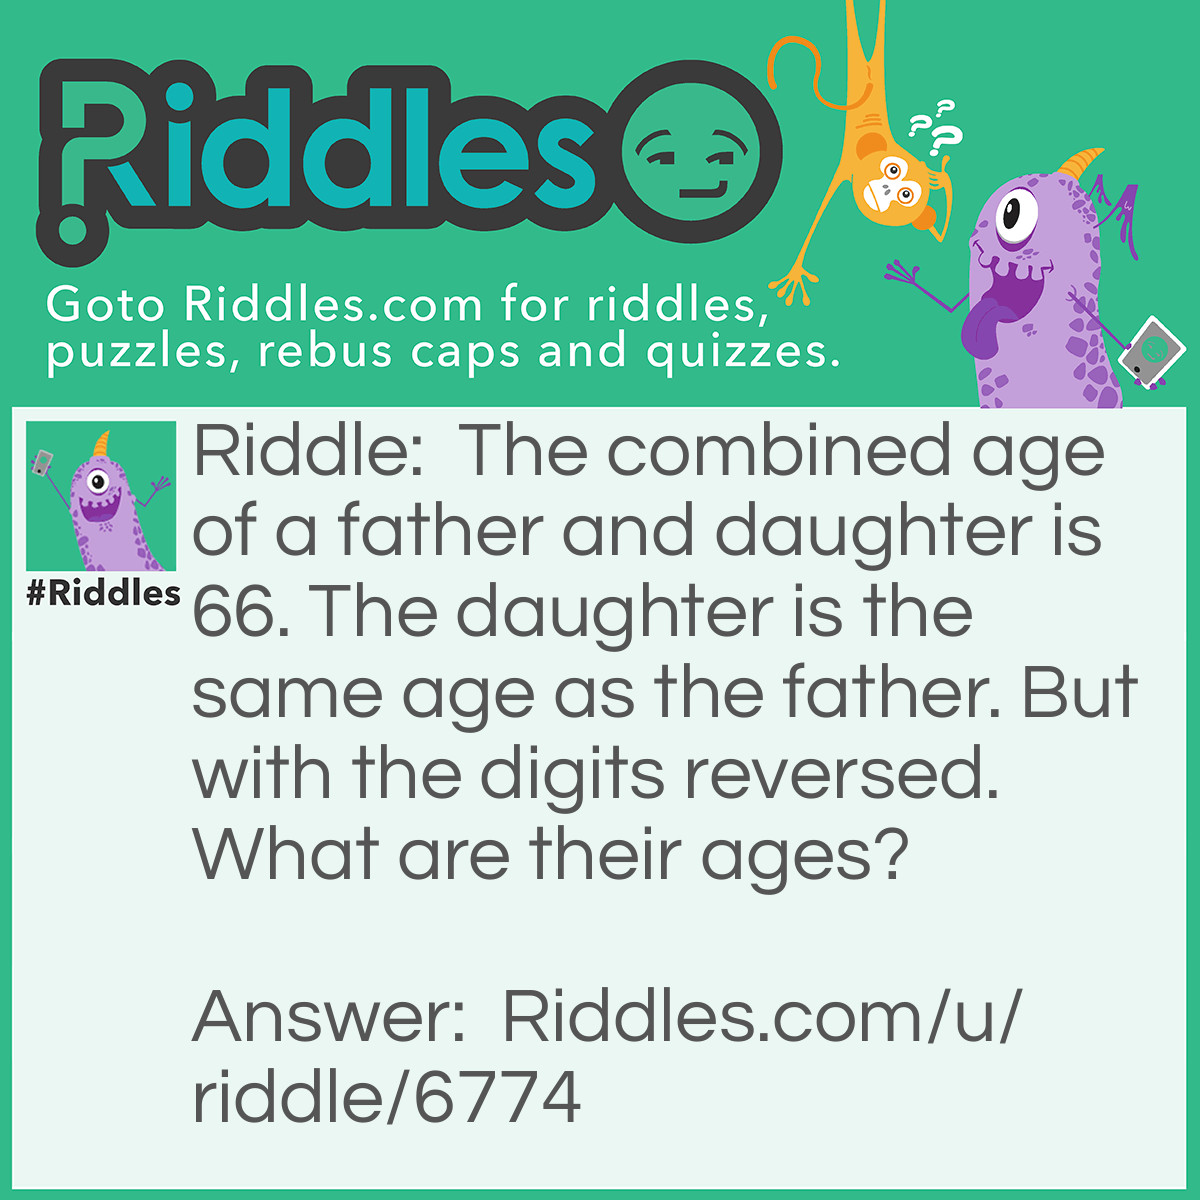 Riddle: The combined age of a father and daughter is 66. The daughter is the same age as the father. But with the digits reversed. What are their ages? Answer: There are three correct answers 51 and 15, 42 and 24, or 60 and 6.